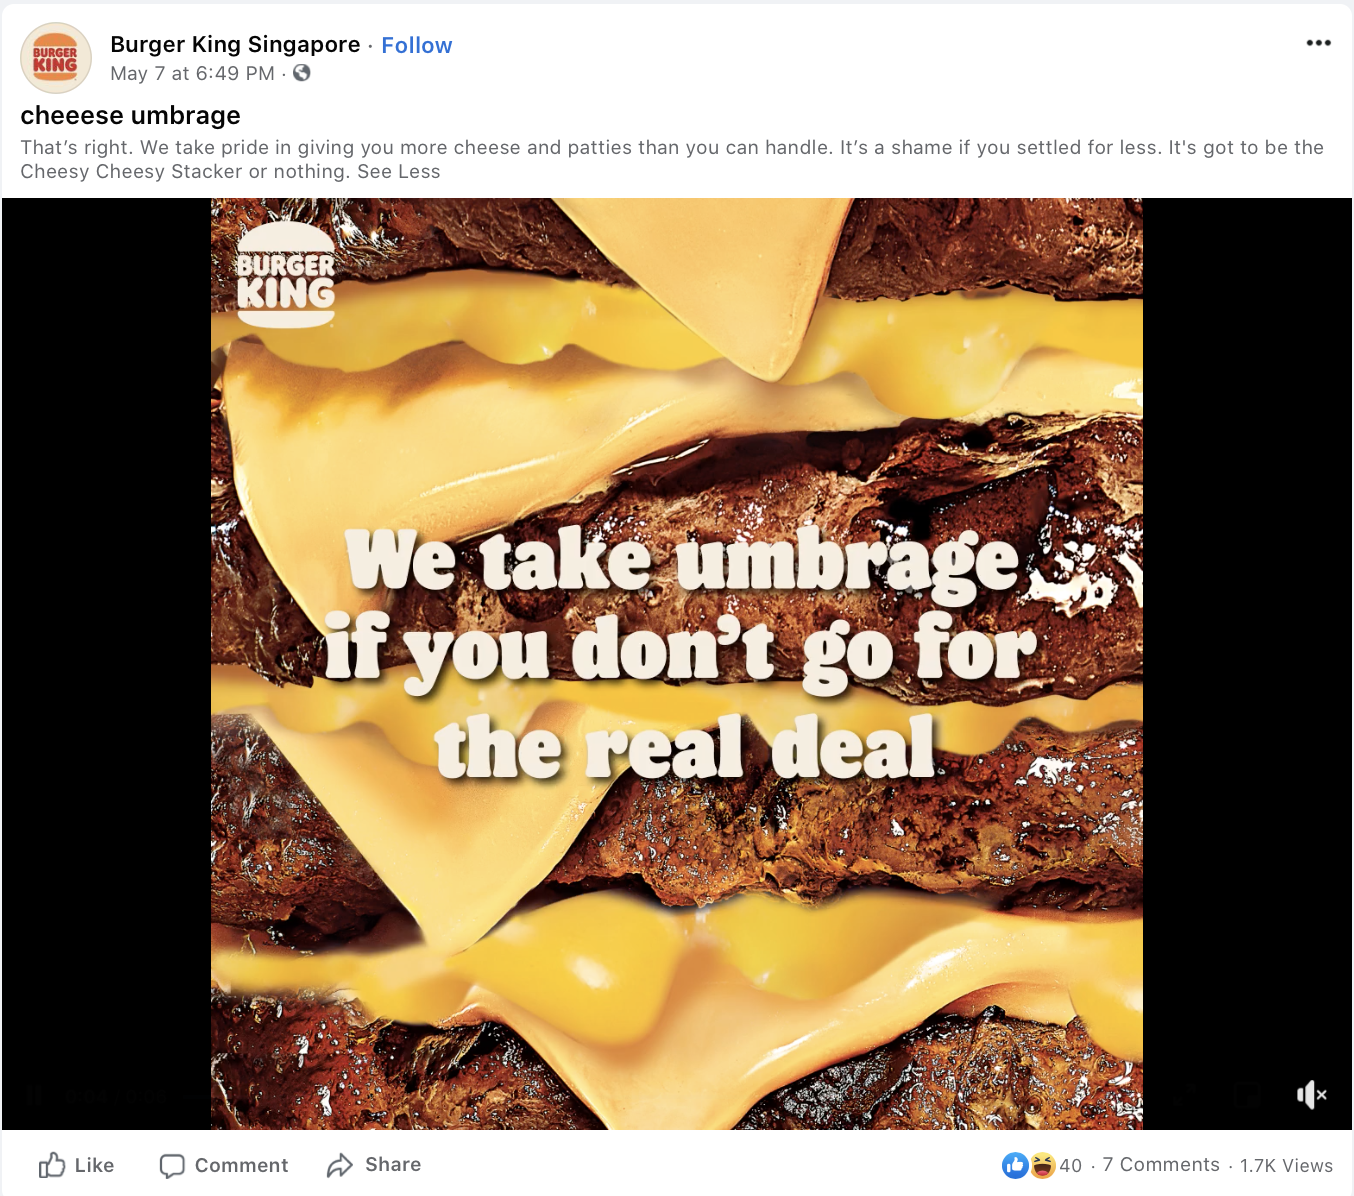 Image from Burger King’s Facebook